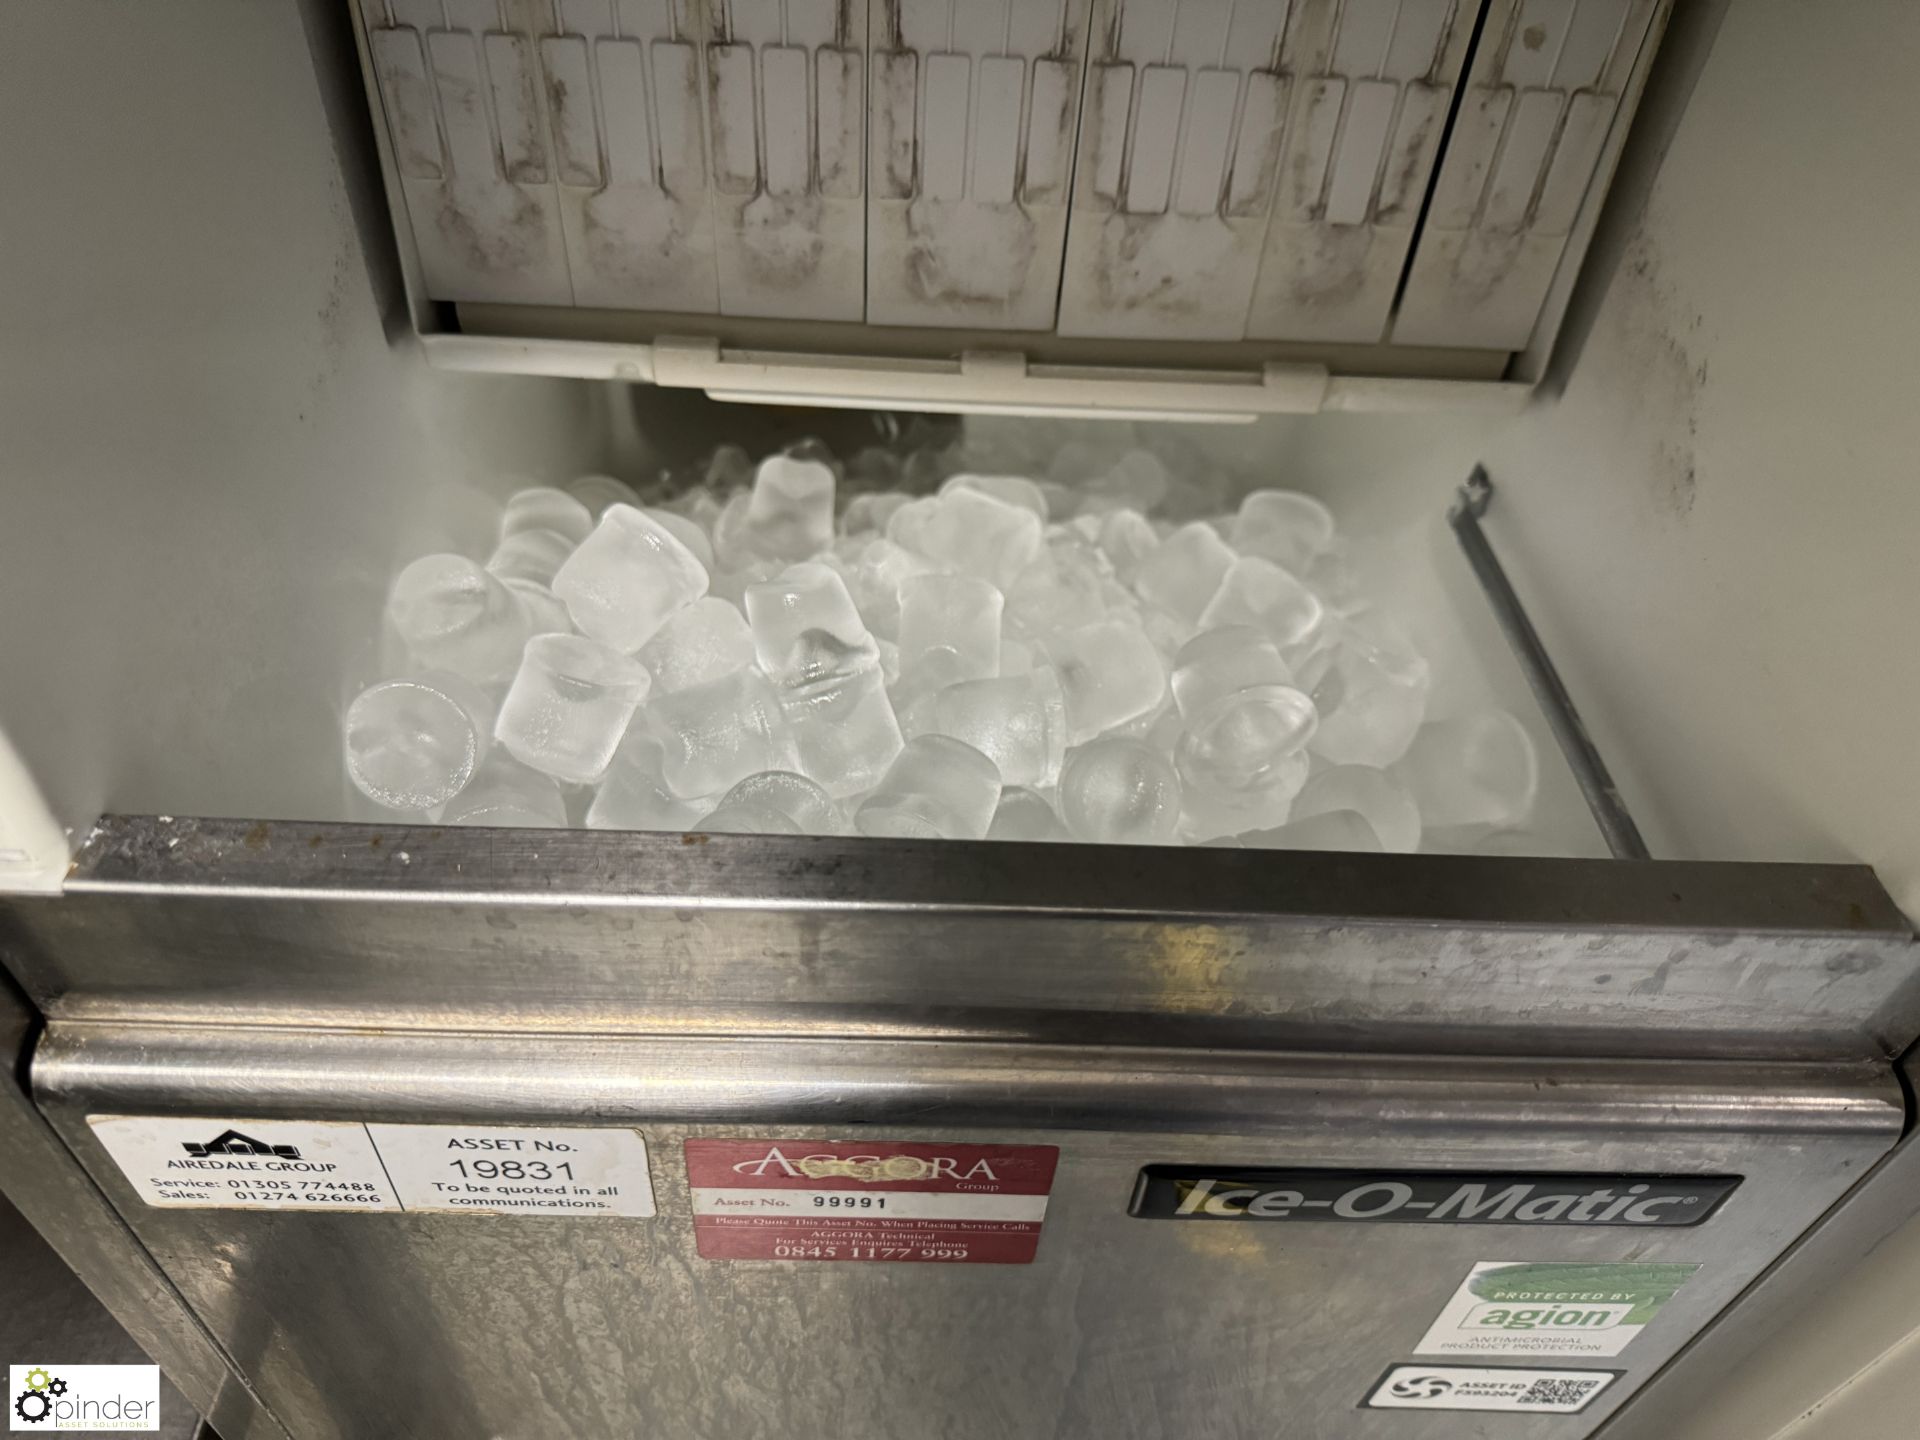 Ice-O-Matic stainless steel Ice Machine, 240volts (location in building - level 23 kitchen) - Image 2 of 3